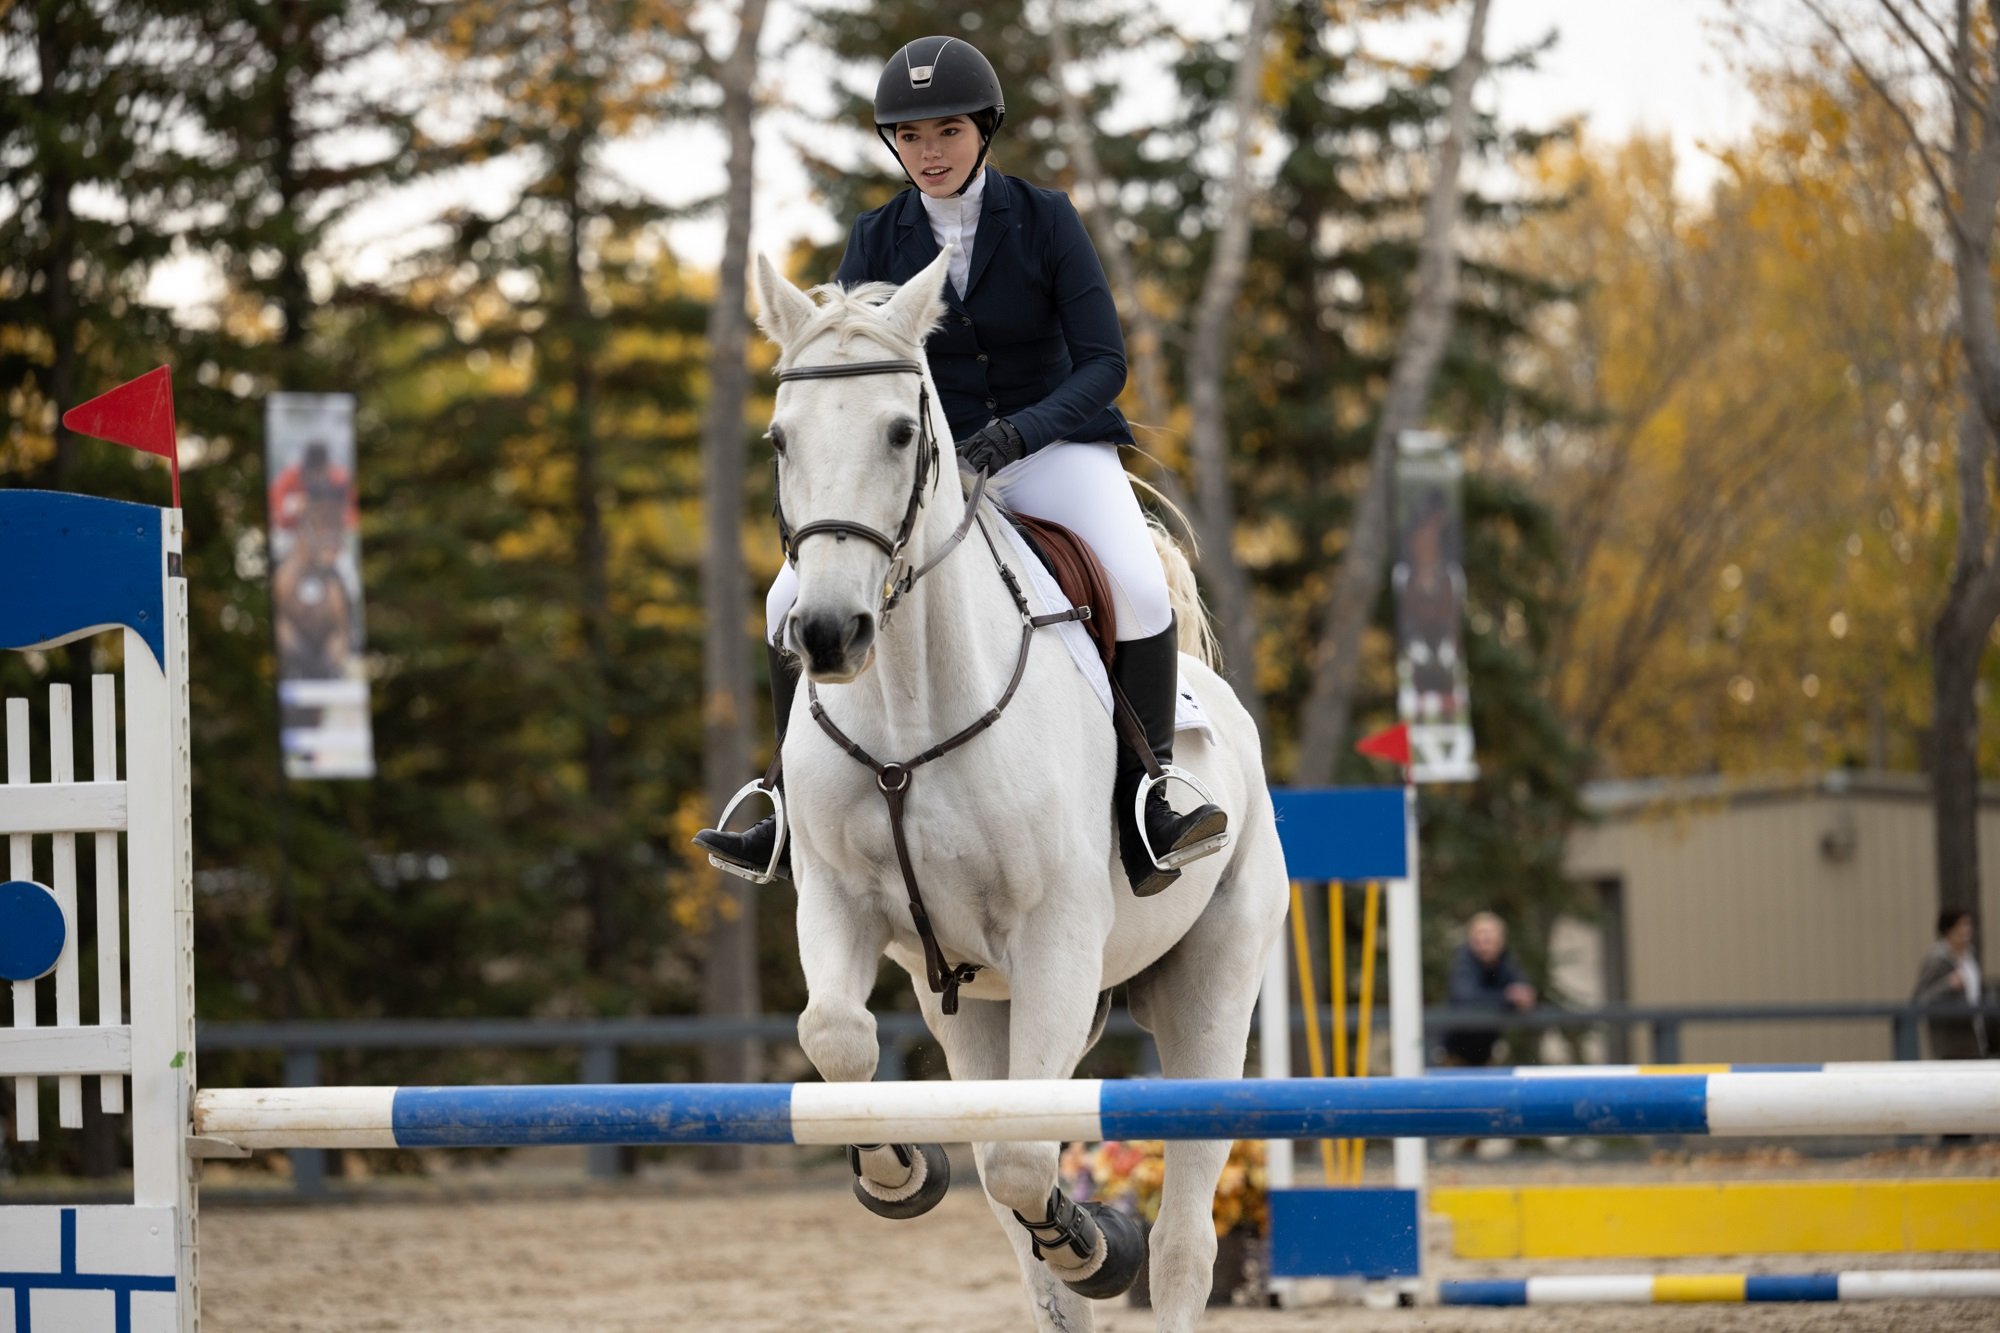 Georgie rides a white horse in a jumping event in 'Heartland'